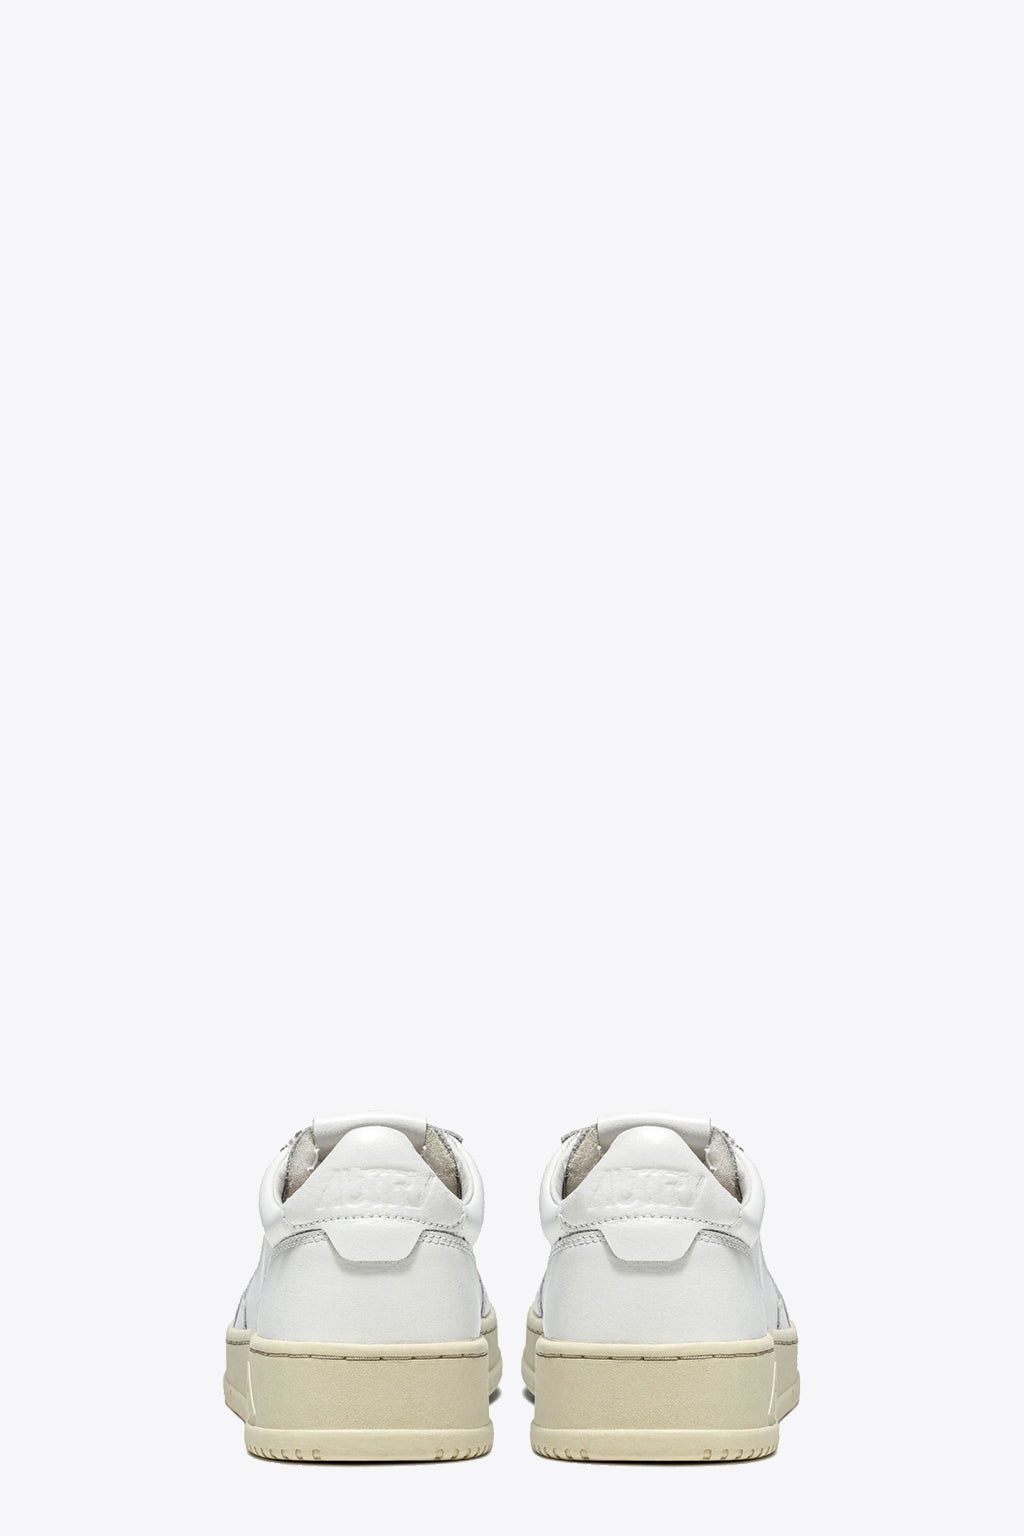 alt-image__White-leather-low-sneaker---Medalist